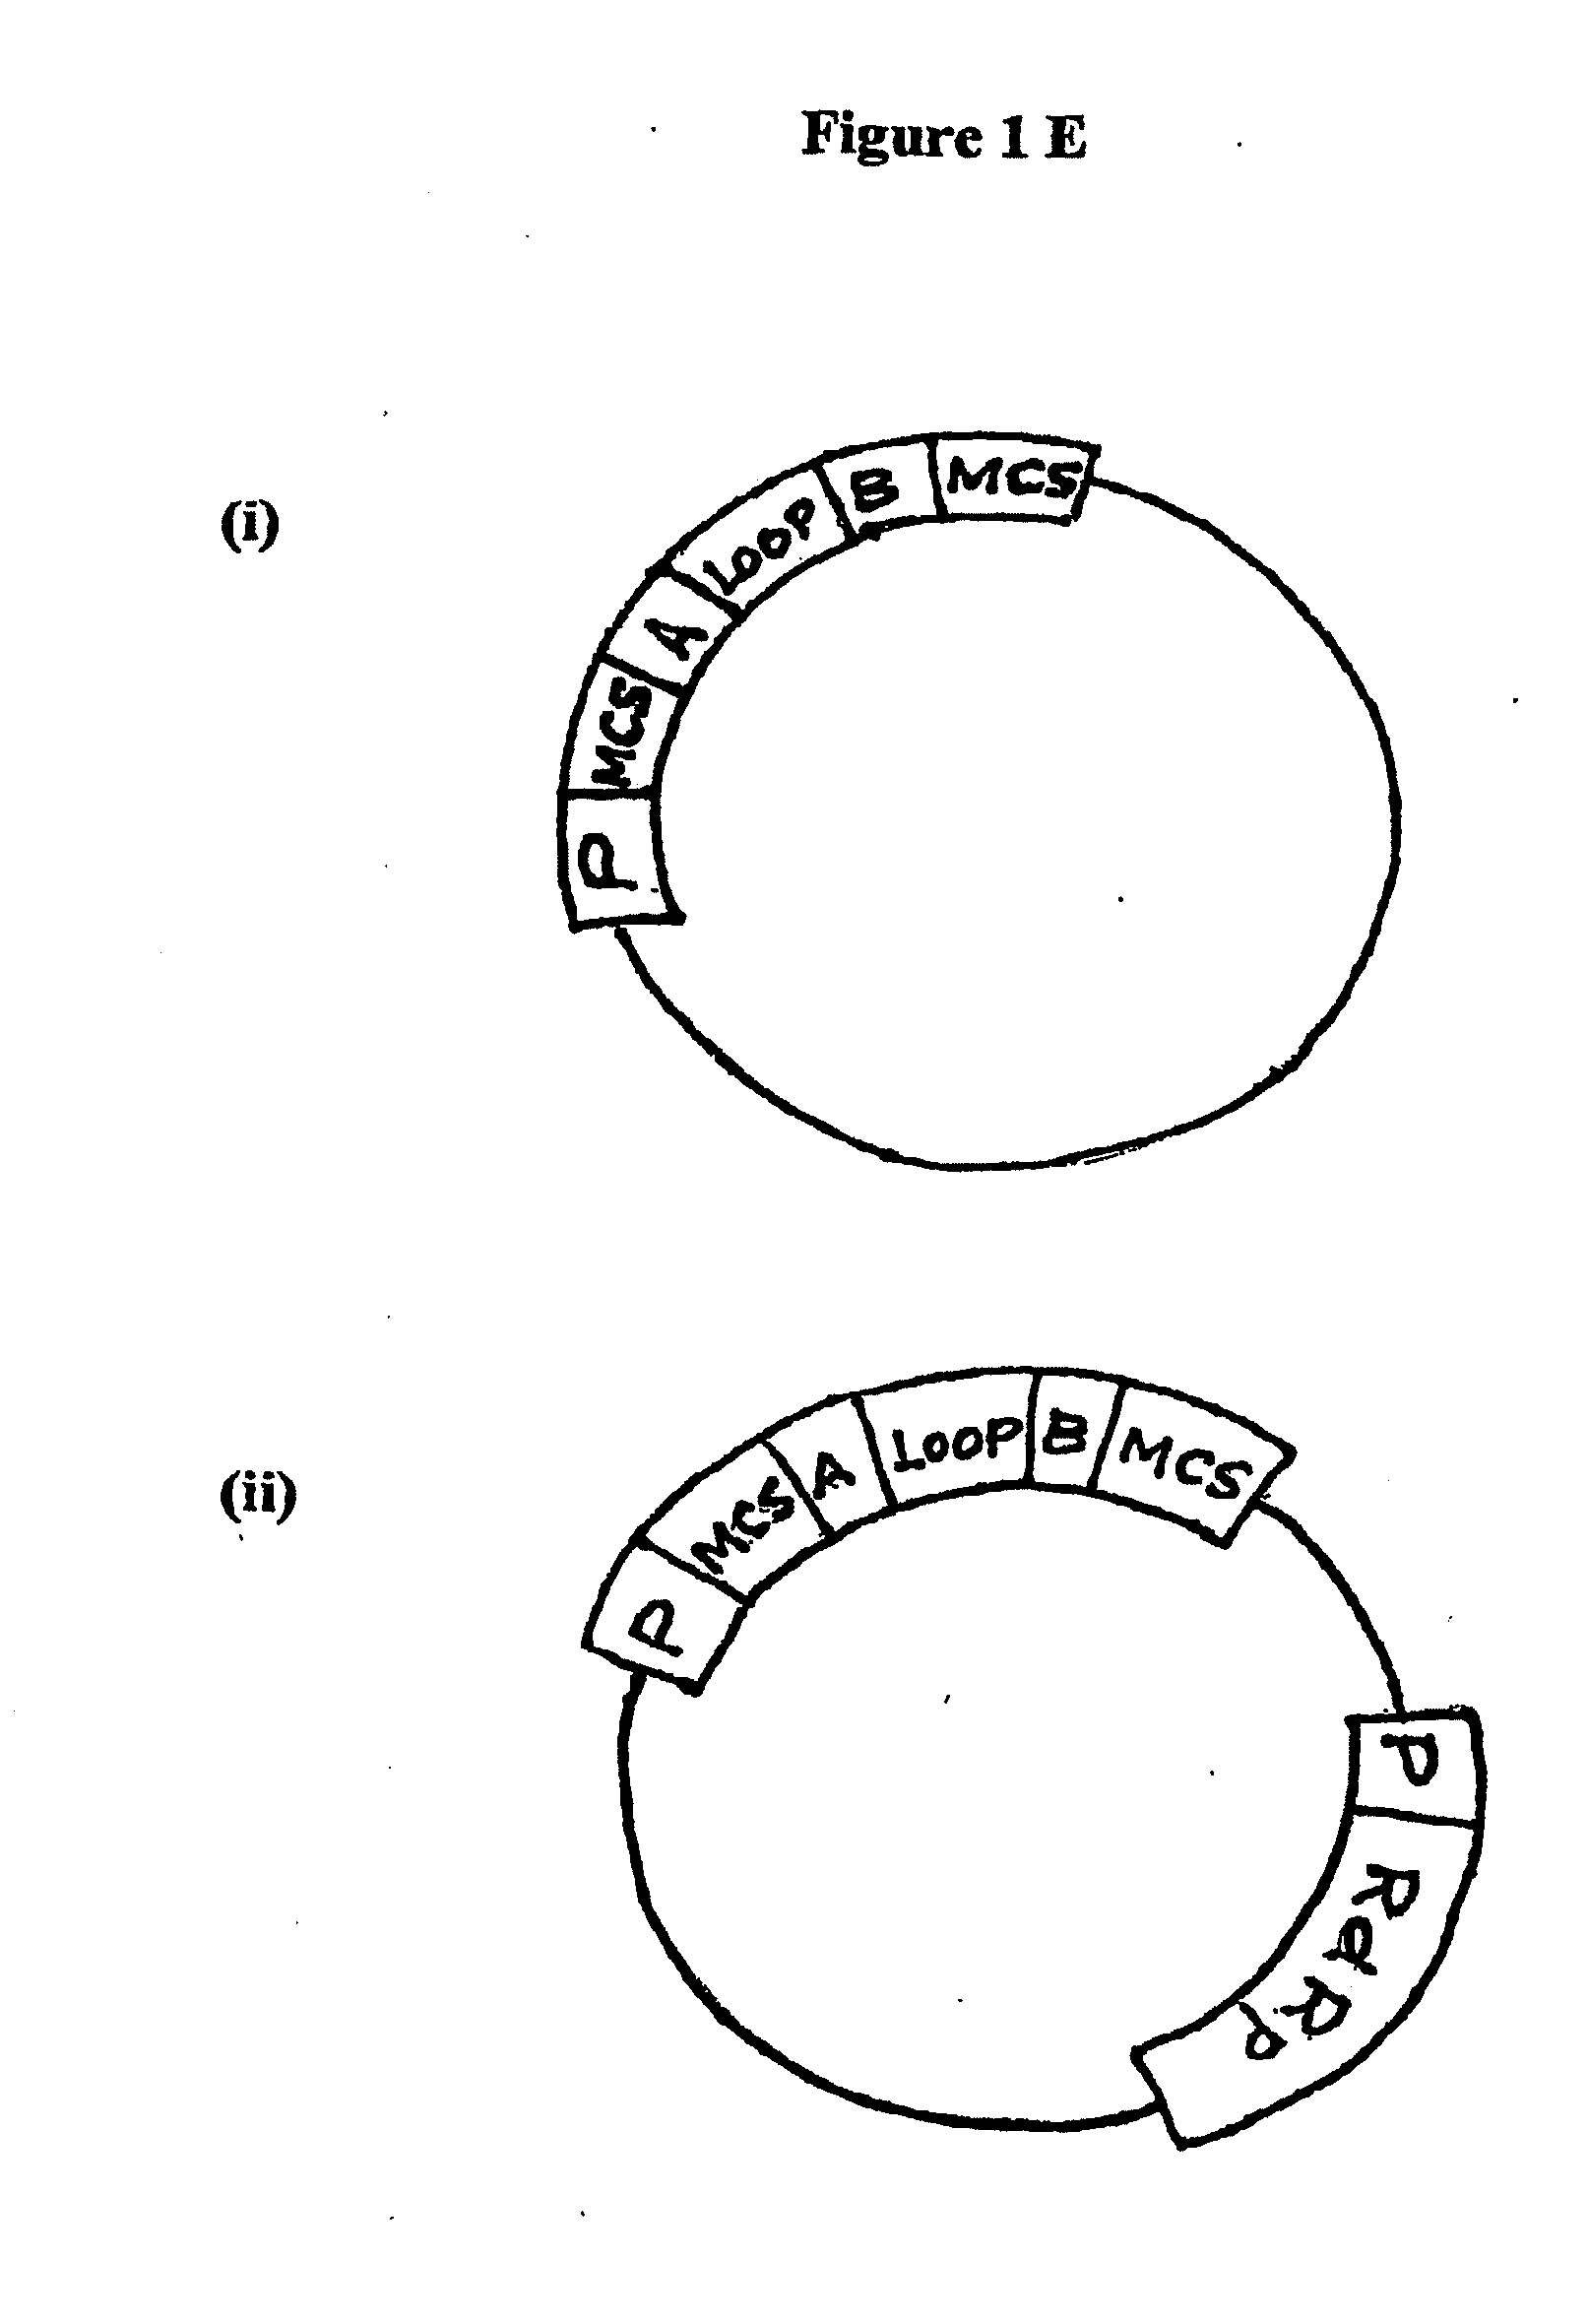 Double stranded RNA structures and constructs, and methods for generating and using the same